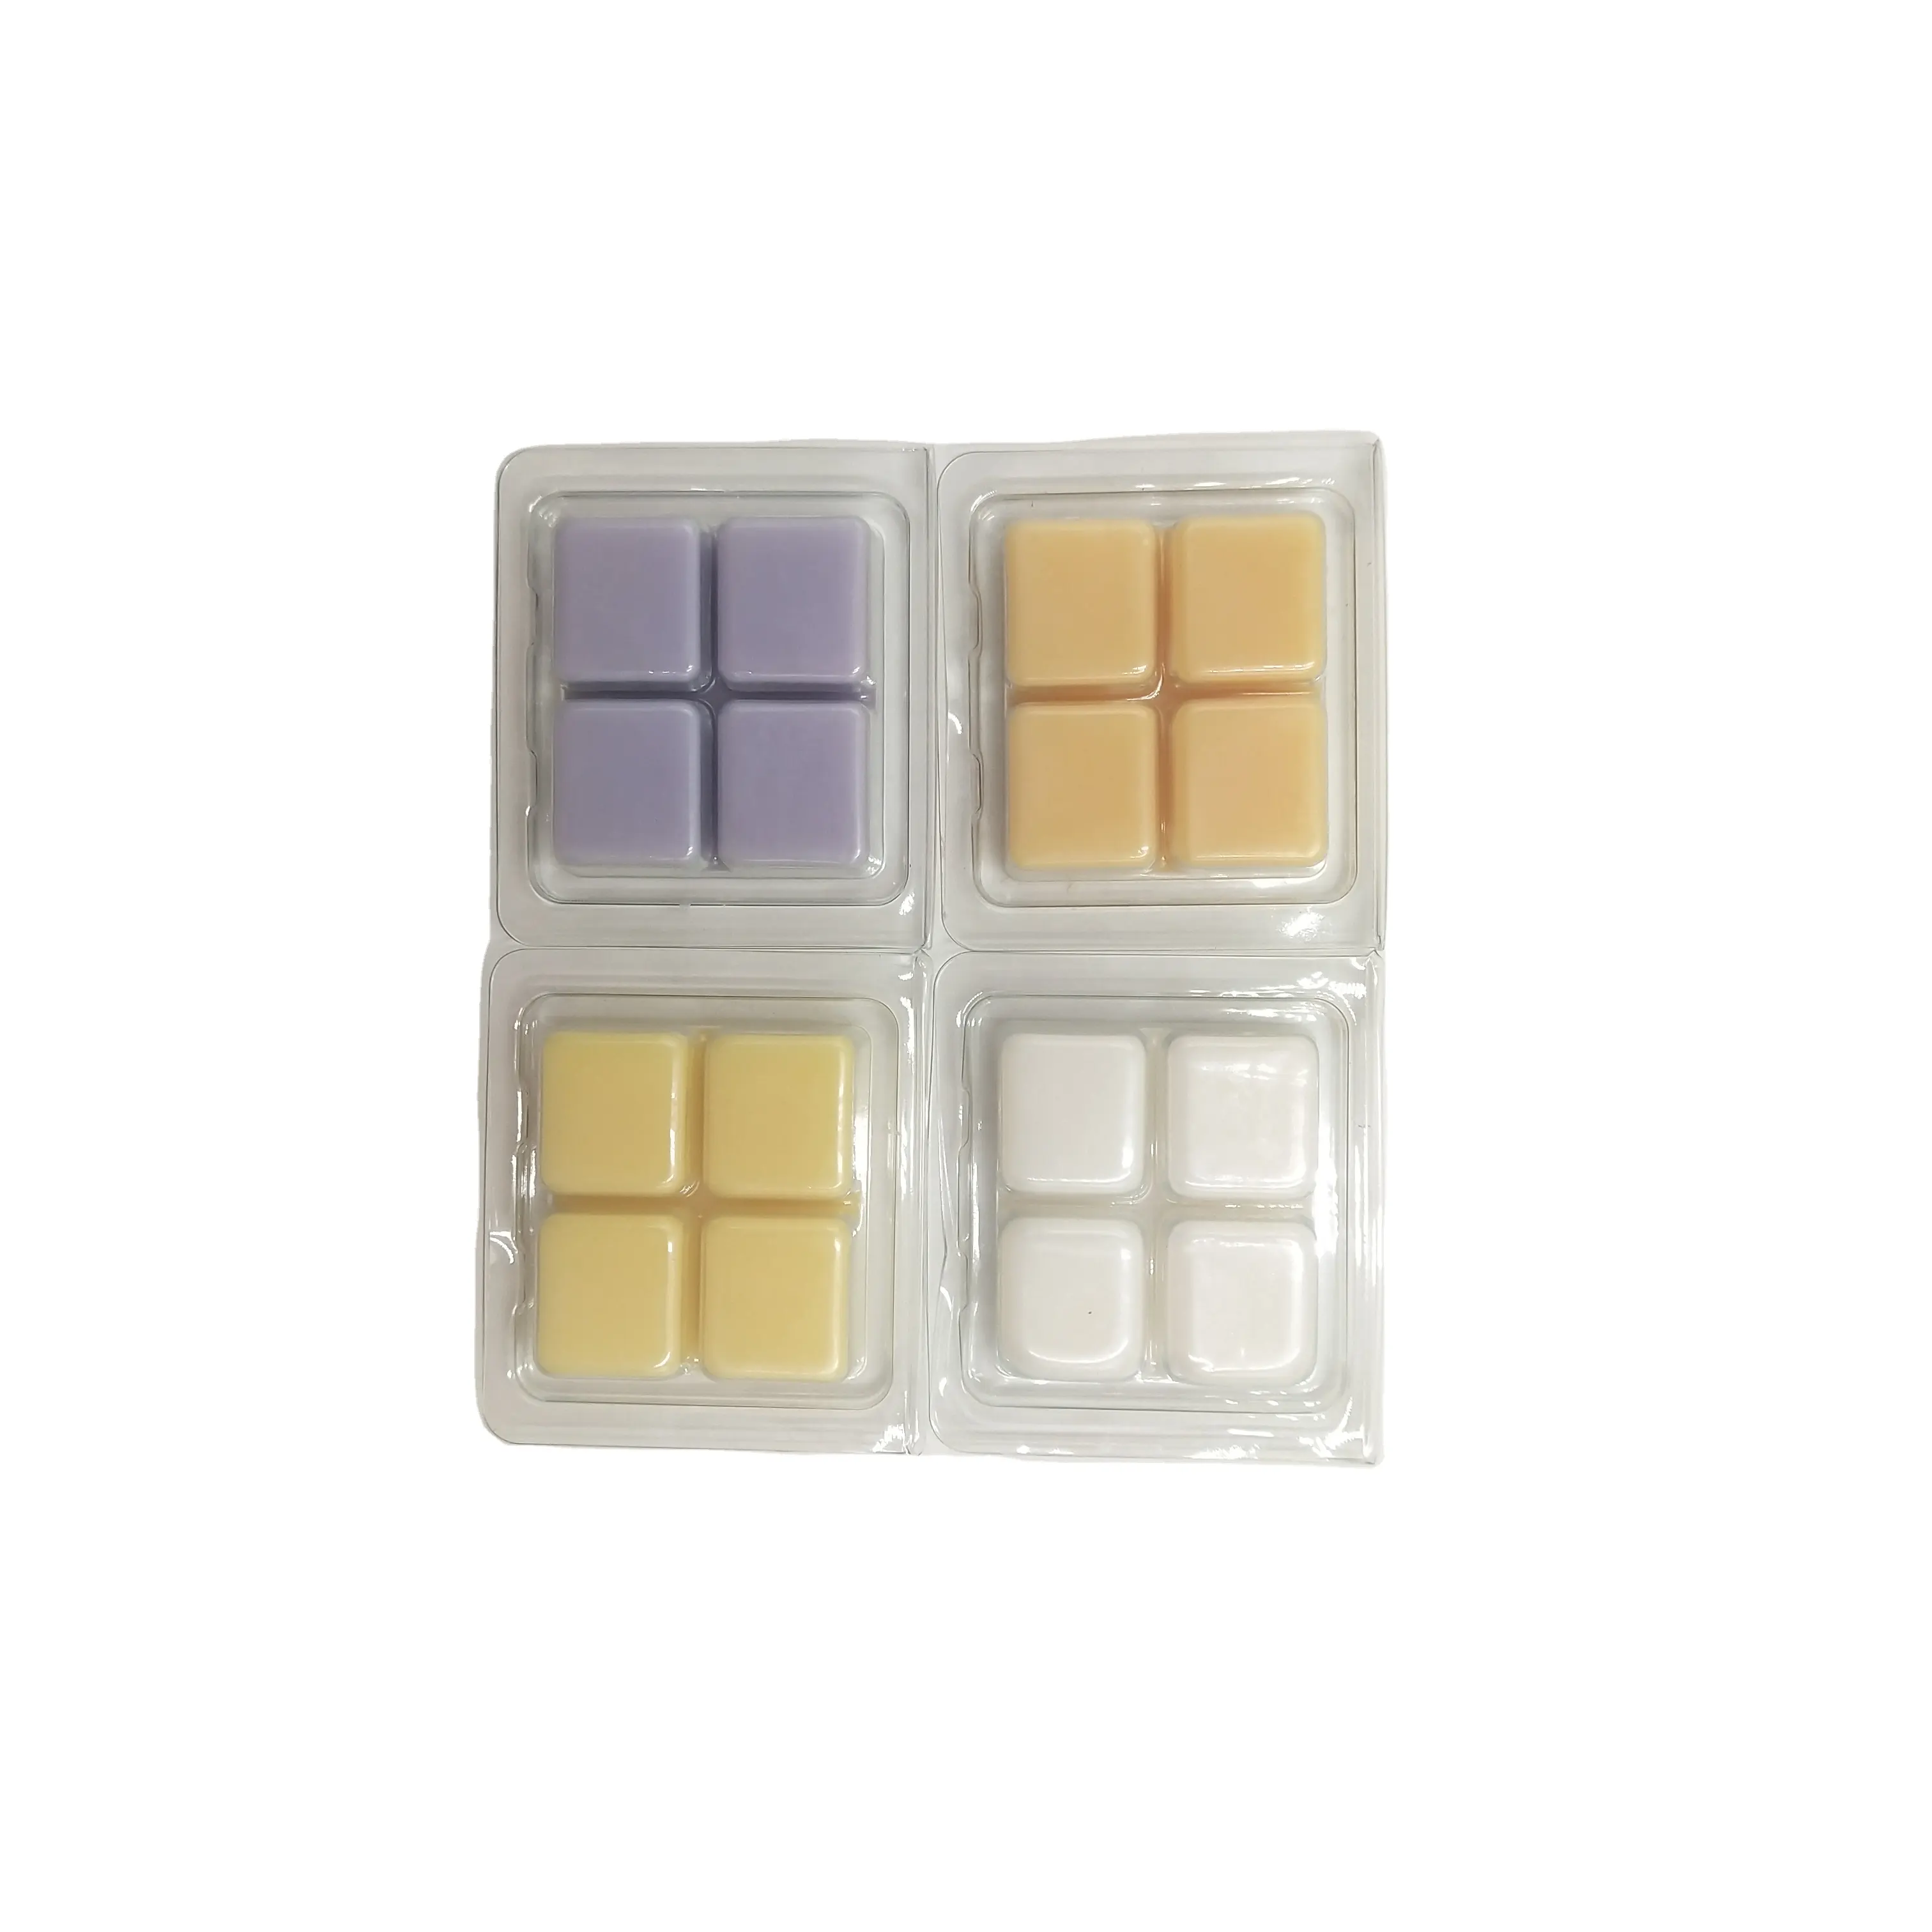 Hot sale four wax block natural scent wax melt aromatherapy scent soy candle gift luxury